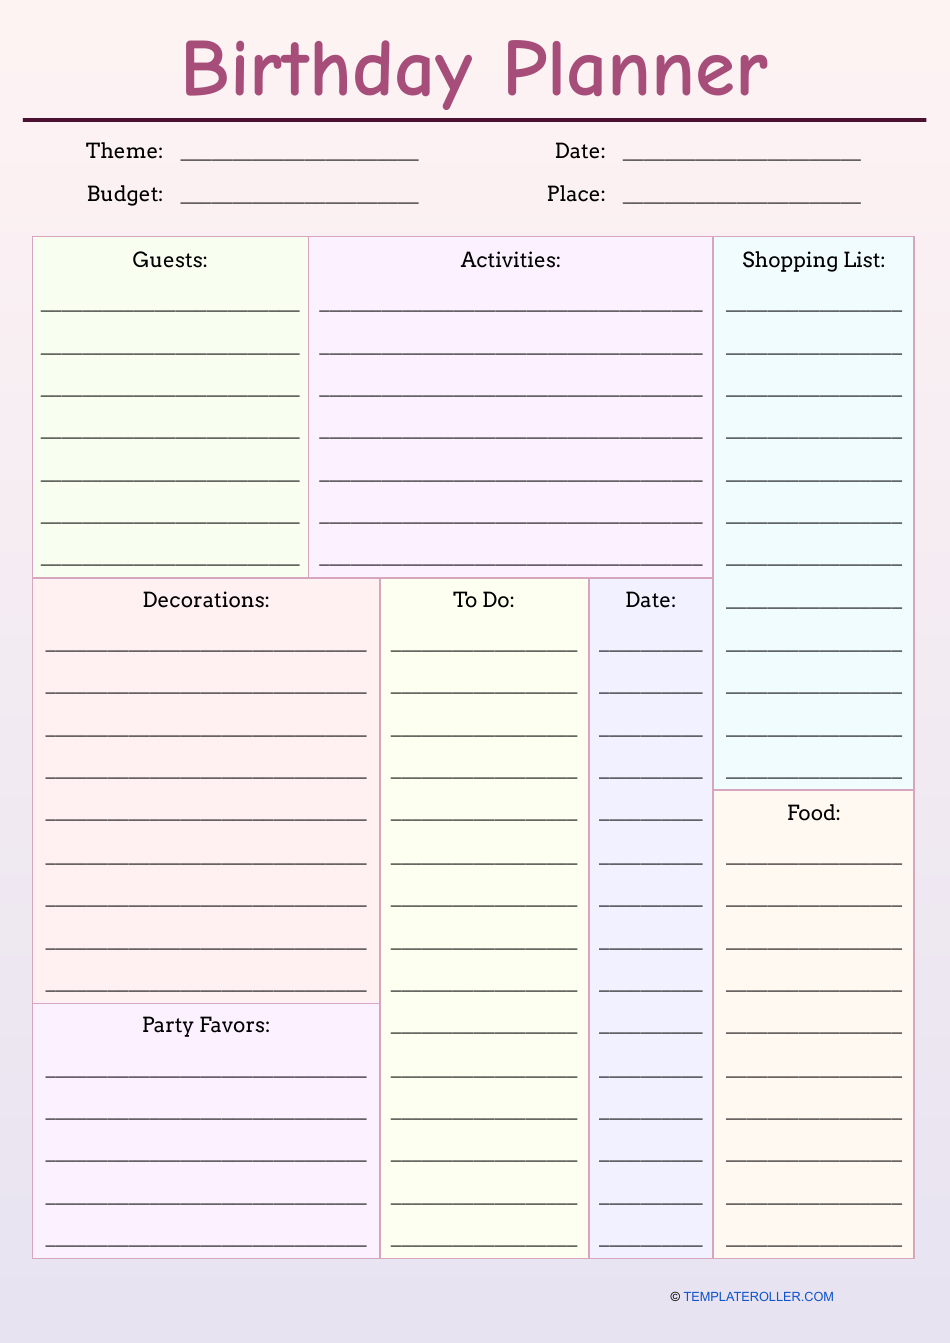 Birthday Planner Template - Organize your party like a pro!